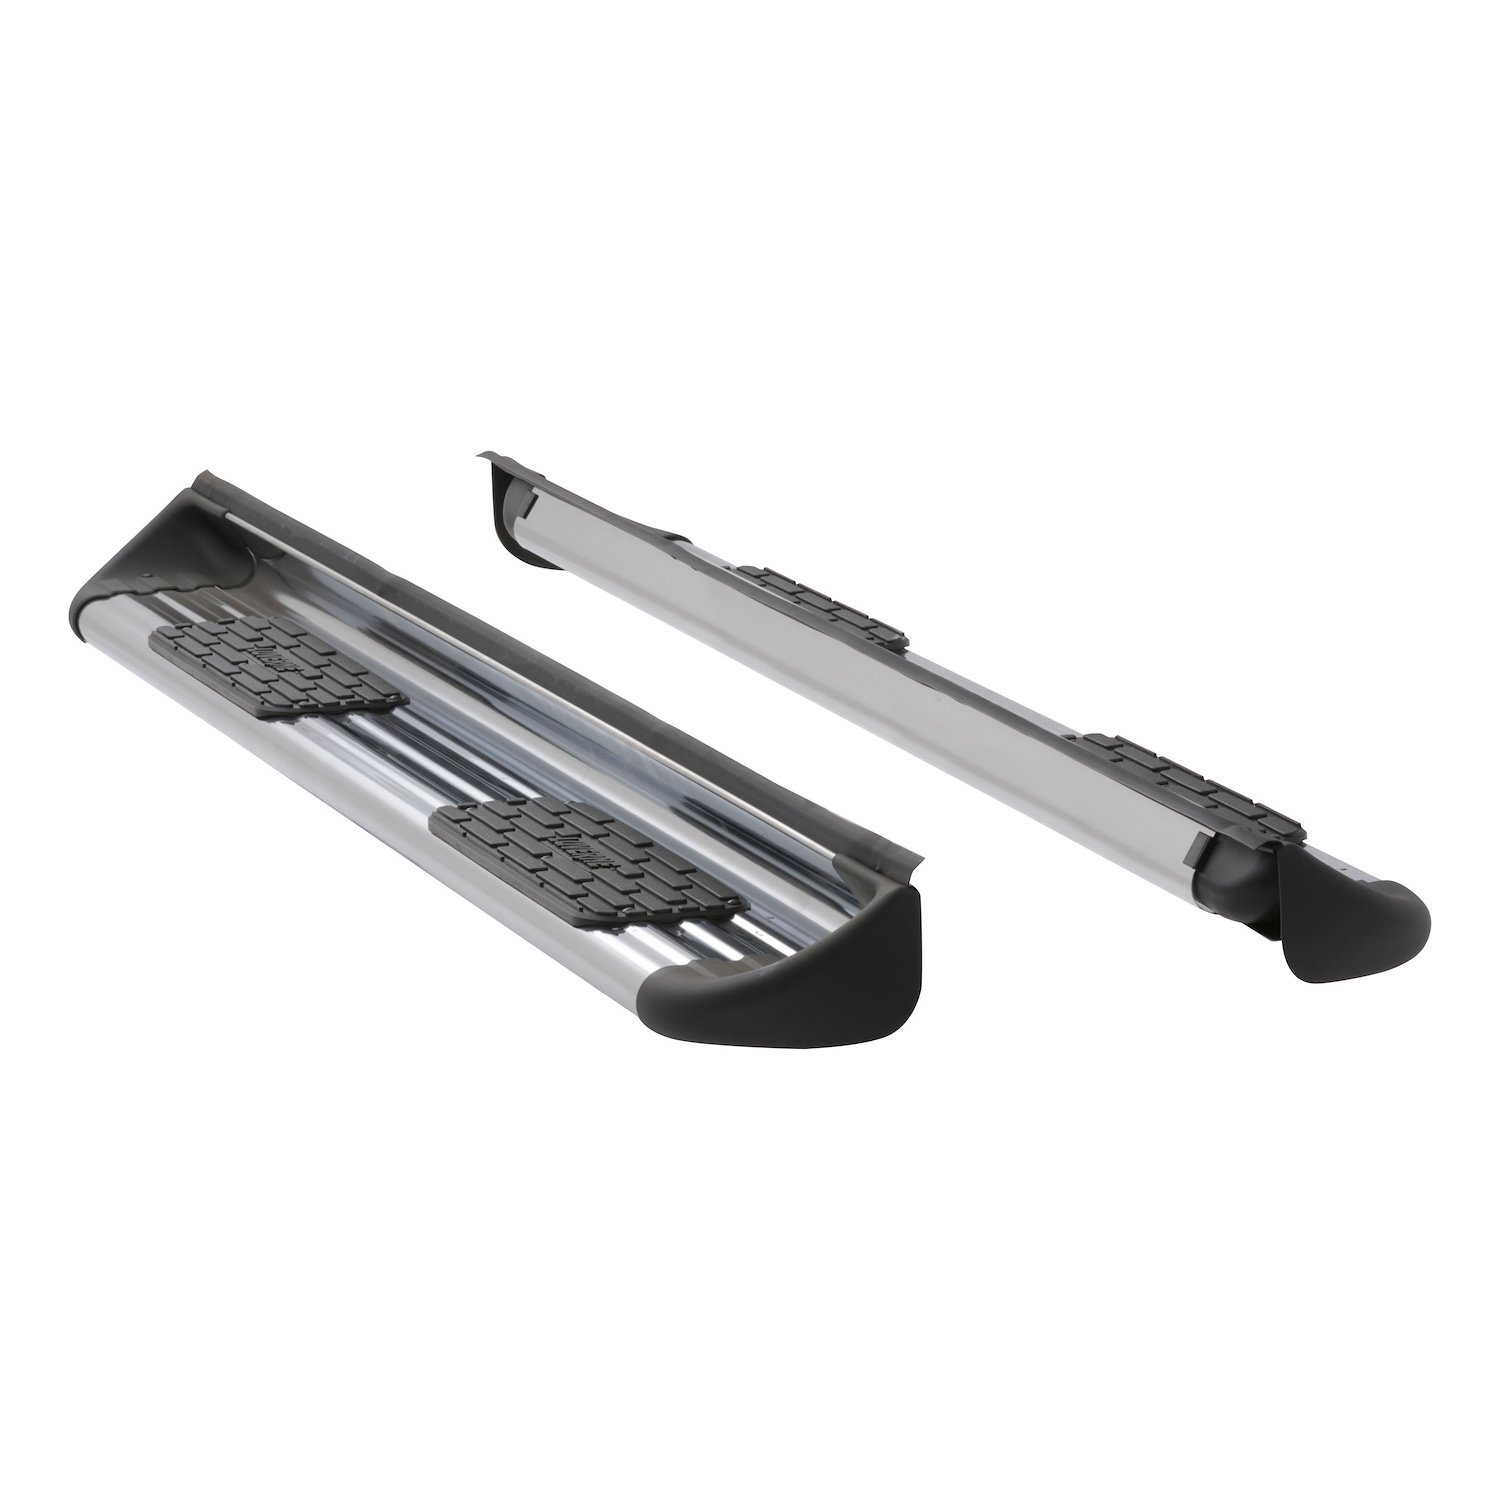 481523-571523 Polished Stainless Steel Side Entry Steps Fits Select Ford F-Series Super Crew